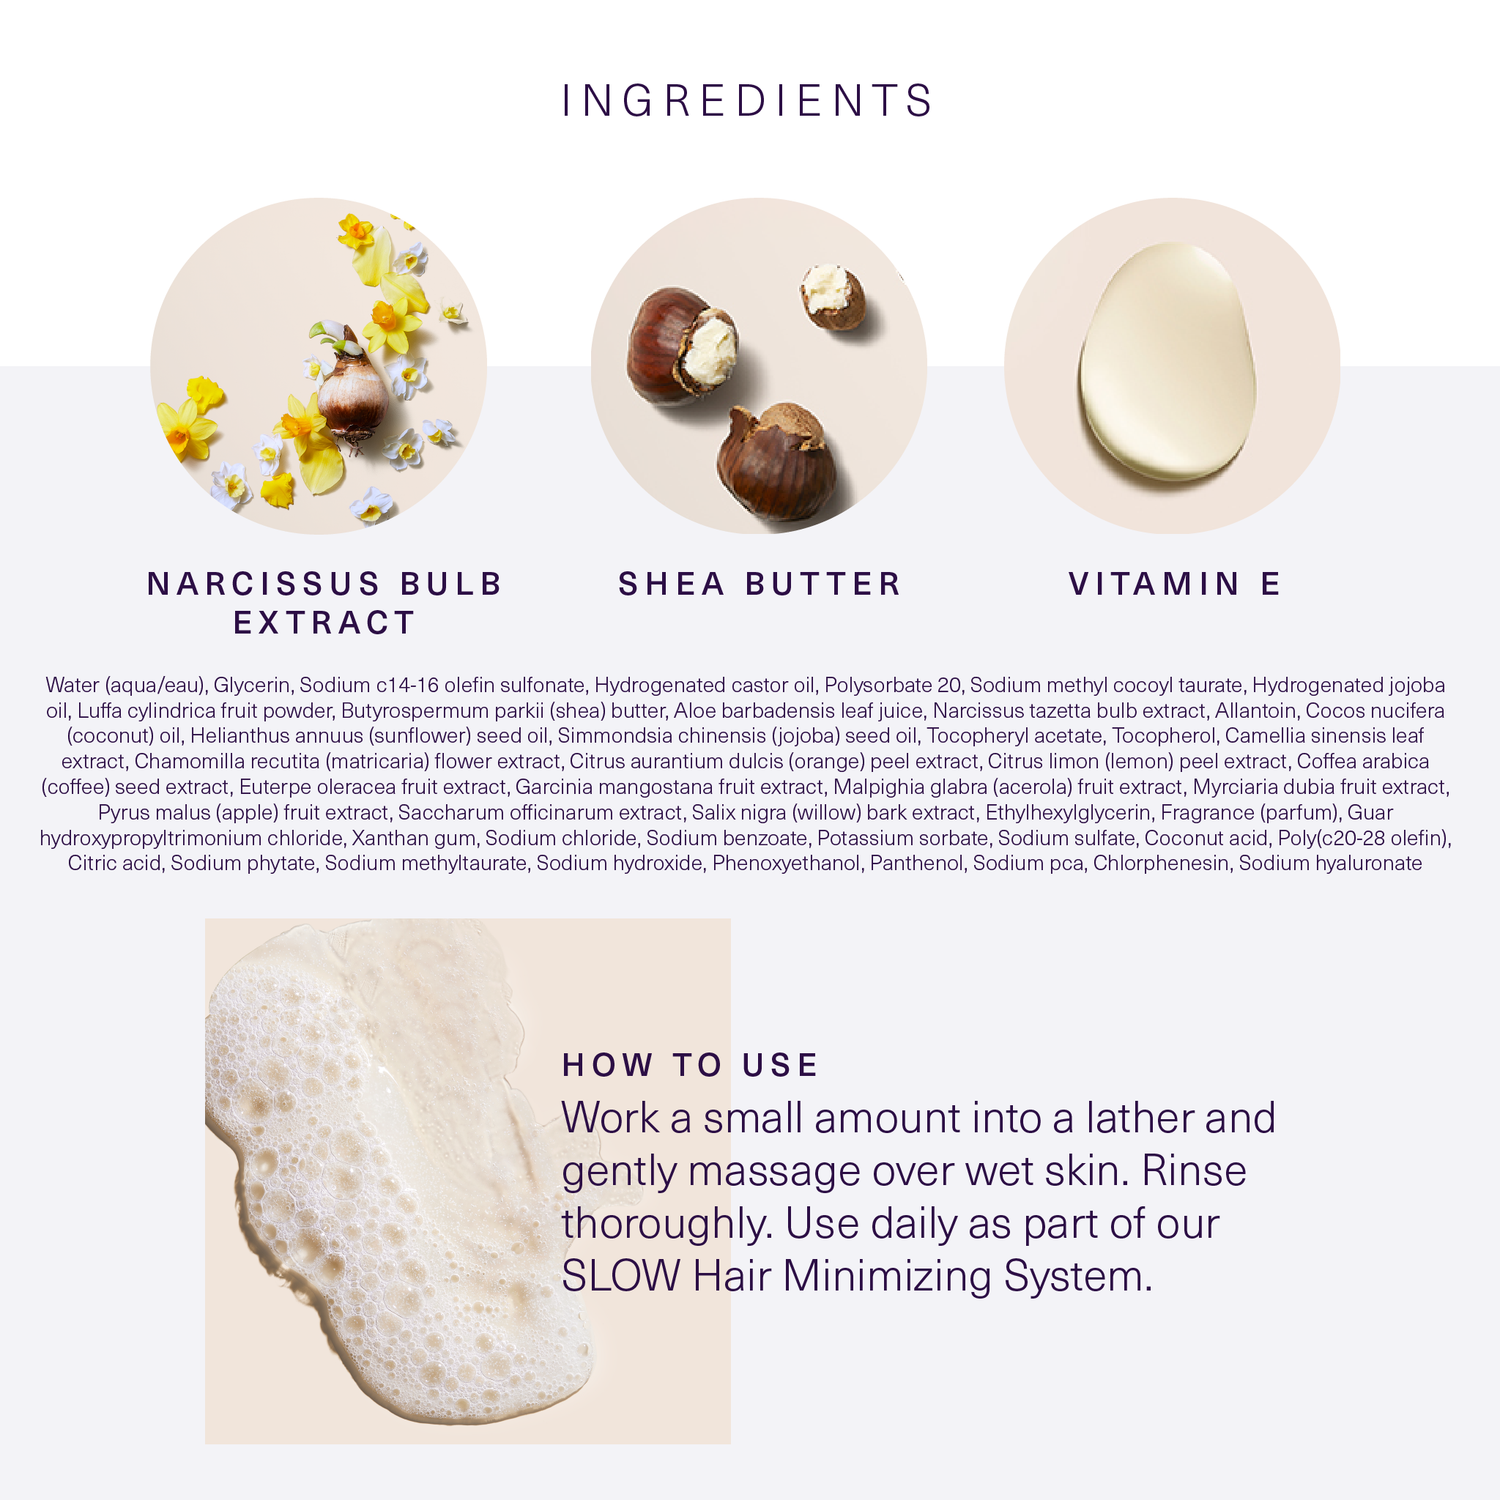 European Wax Center infographic of ingredients and how to use Shea Body Wash with images of narcissus extract, shea butter, and vitamin e on white and light purple background